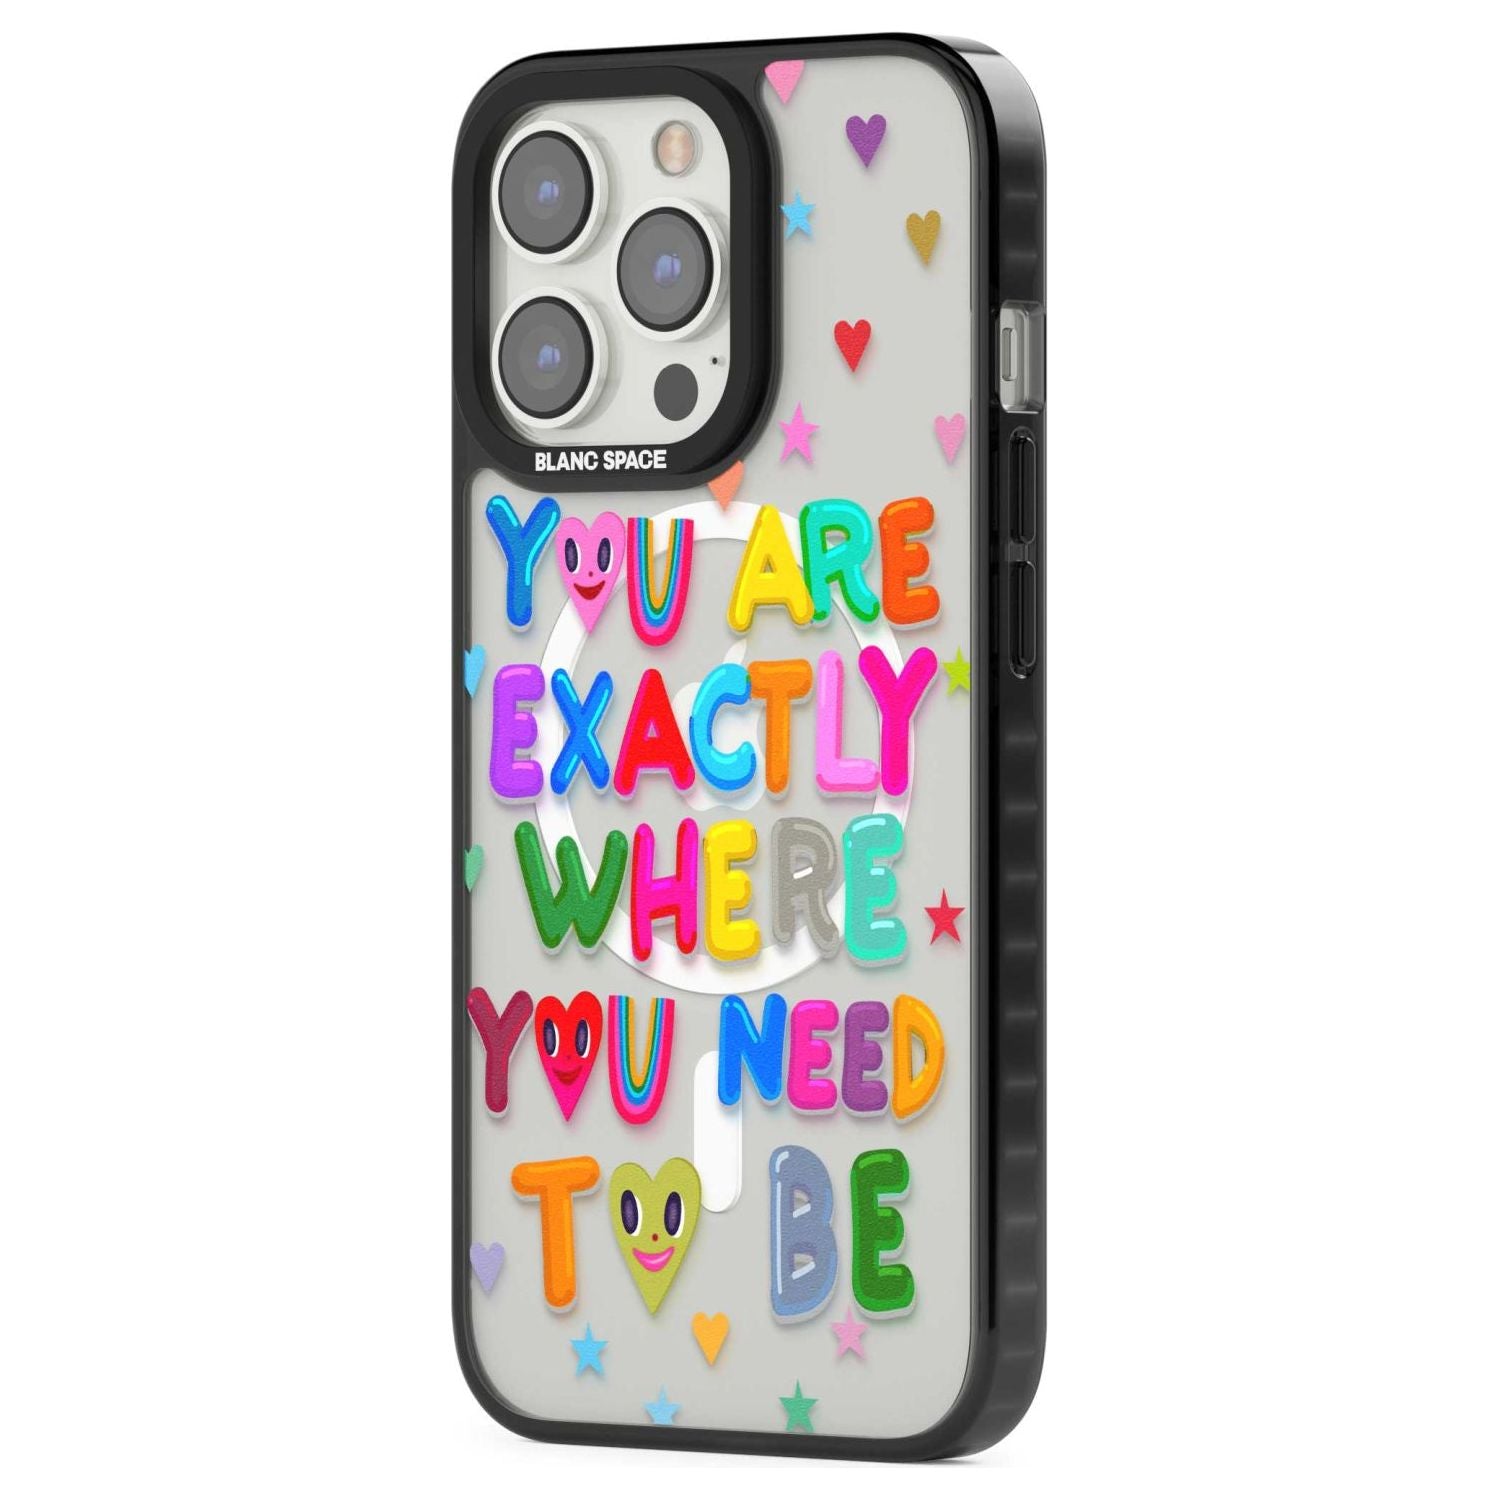 Exactly Where You Need To be Phone Case iPhone 15 Pro Max / Black Impact Case,iPhone 15 Plus / Black Impact Case,iPhone 15 Pro / Black Impact Case,iPhone 15 / Black Impact Case,iPhone 15 Pro Max / Impact Case,iPhone 15 Plus / Impact Case,iPhone 15 Pro / Impact Case,iPhone 15 / Impact Case,iPhone 15 Pro Max / Magsa